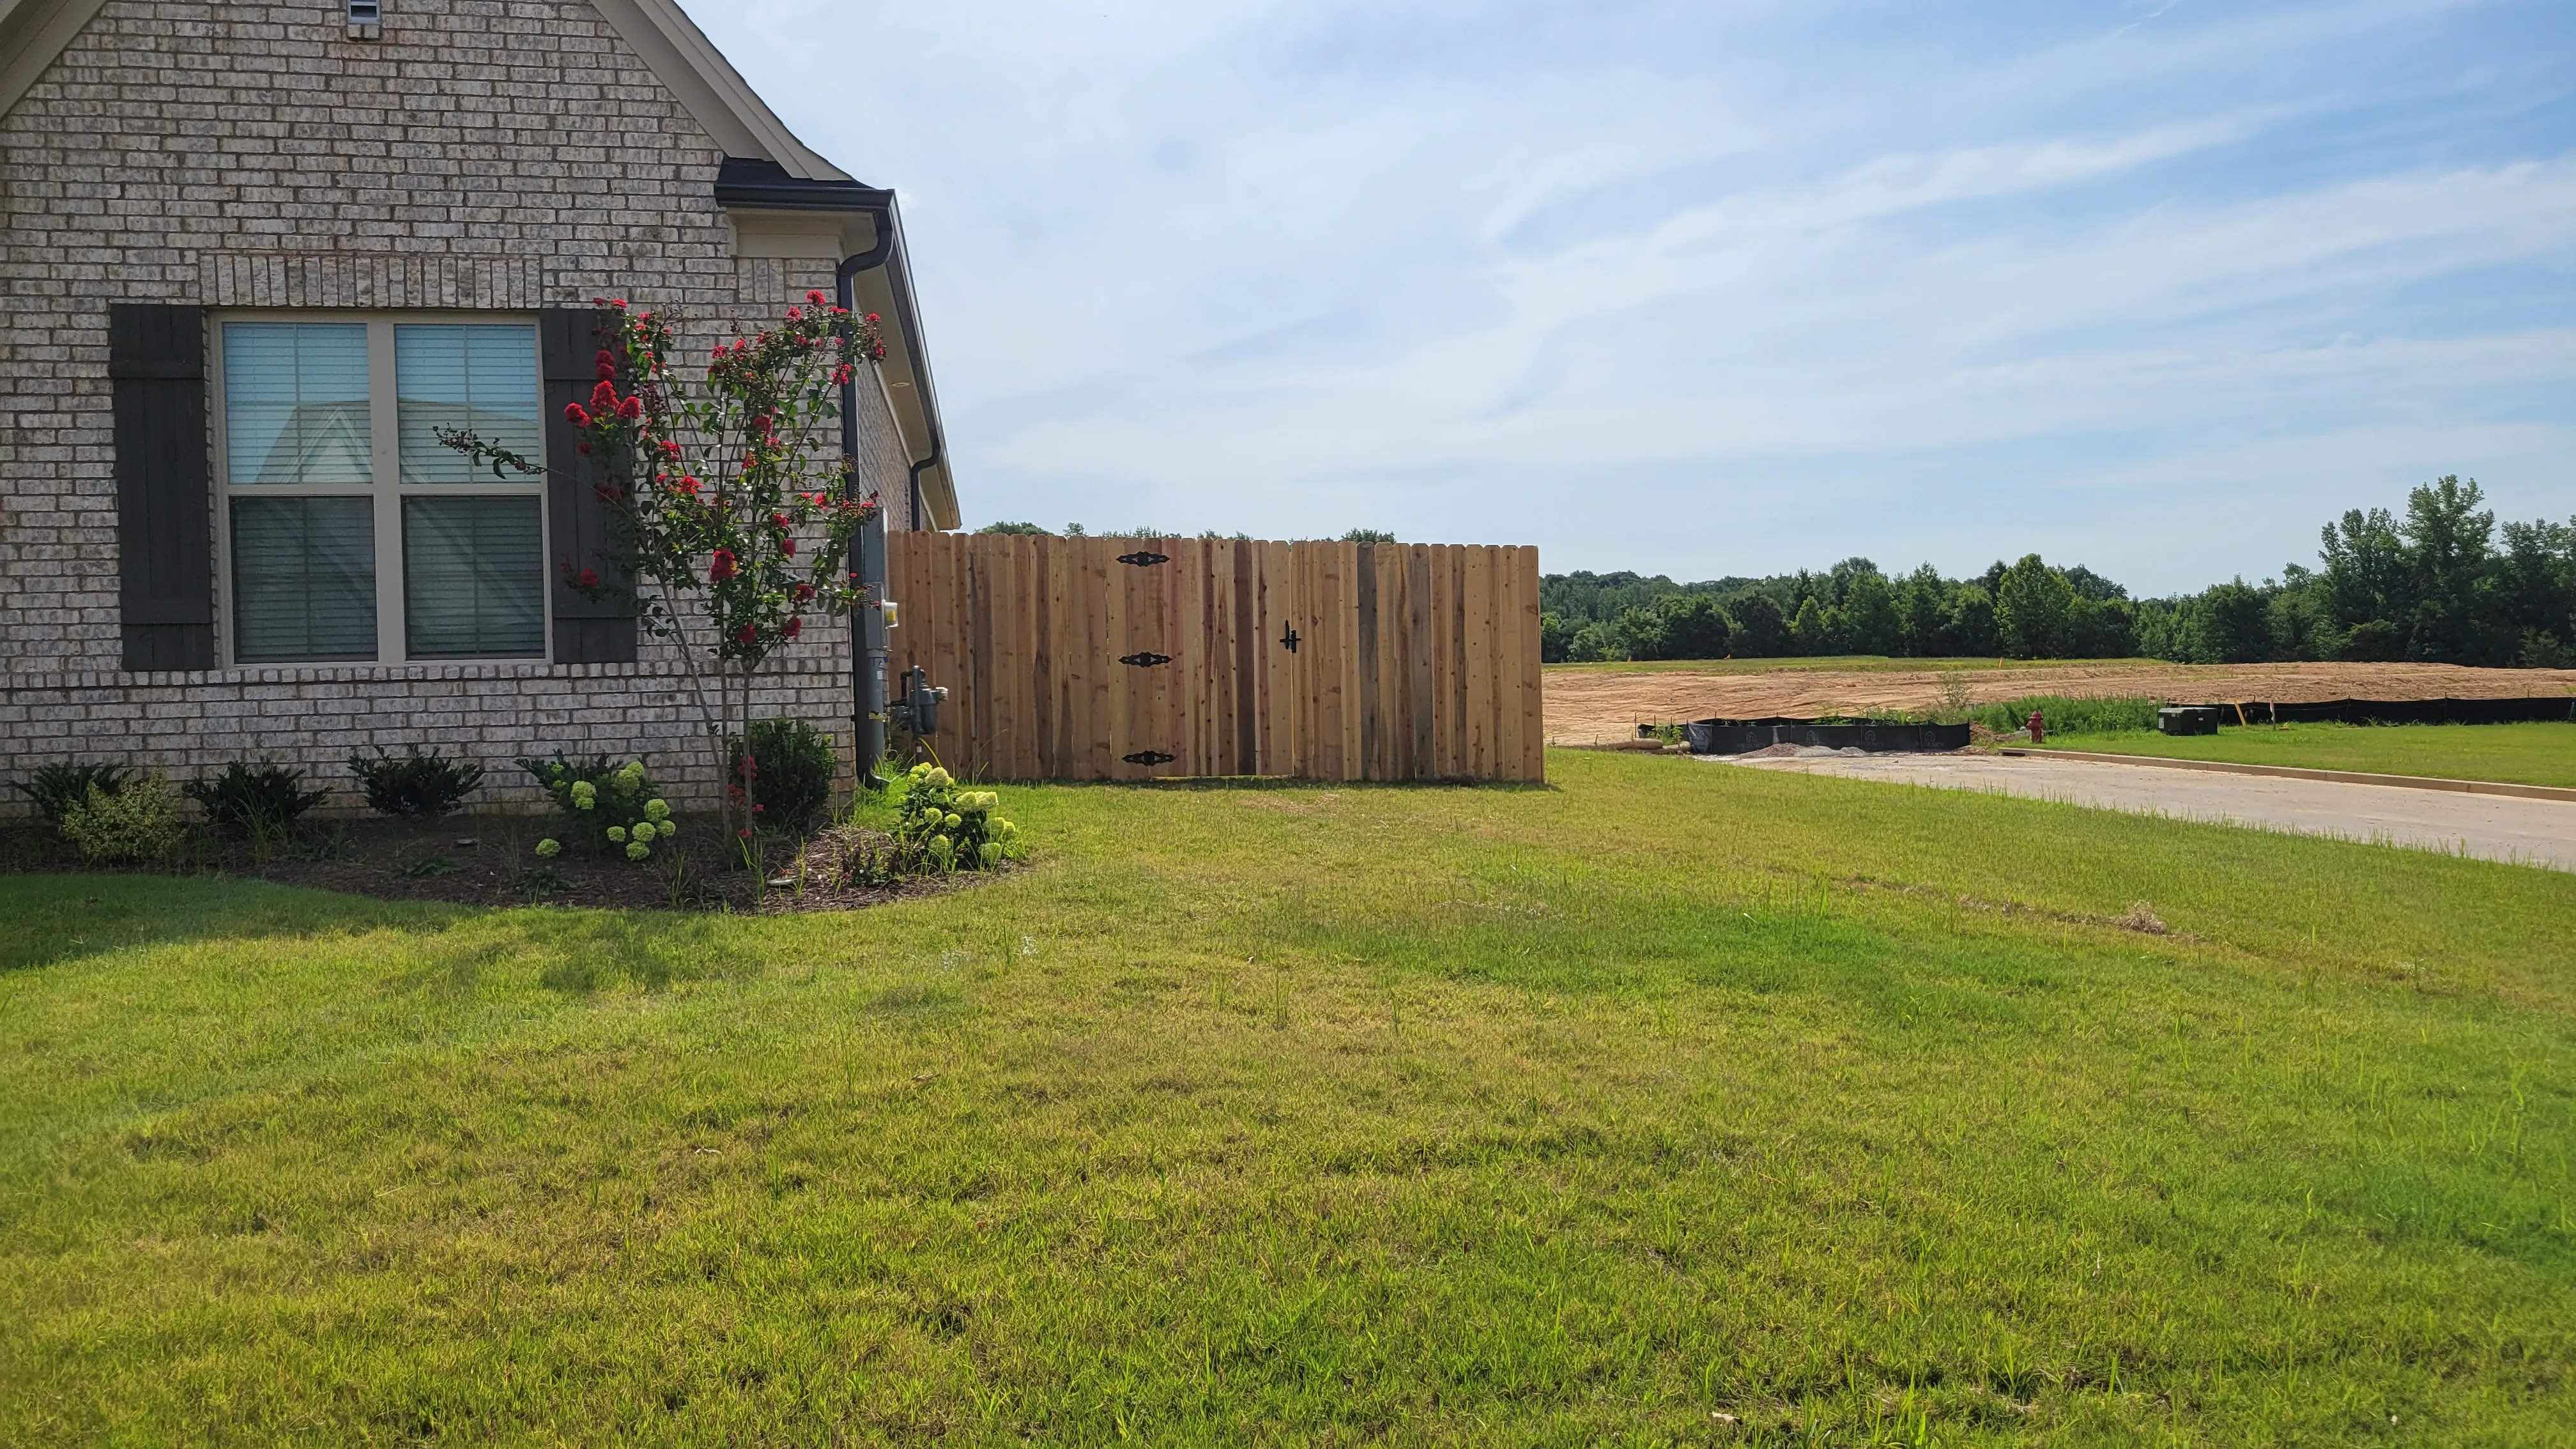 Fence Installation for Patriot Fence  in Oakland, TN